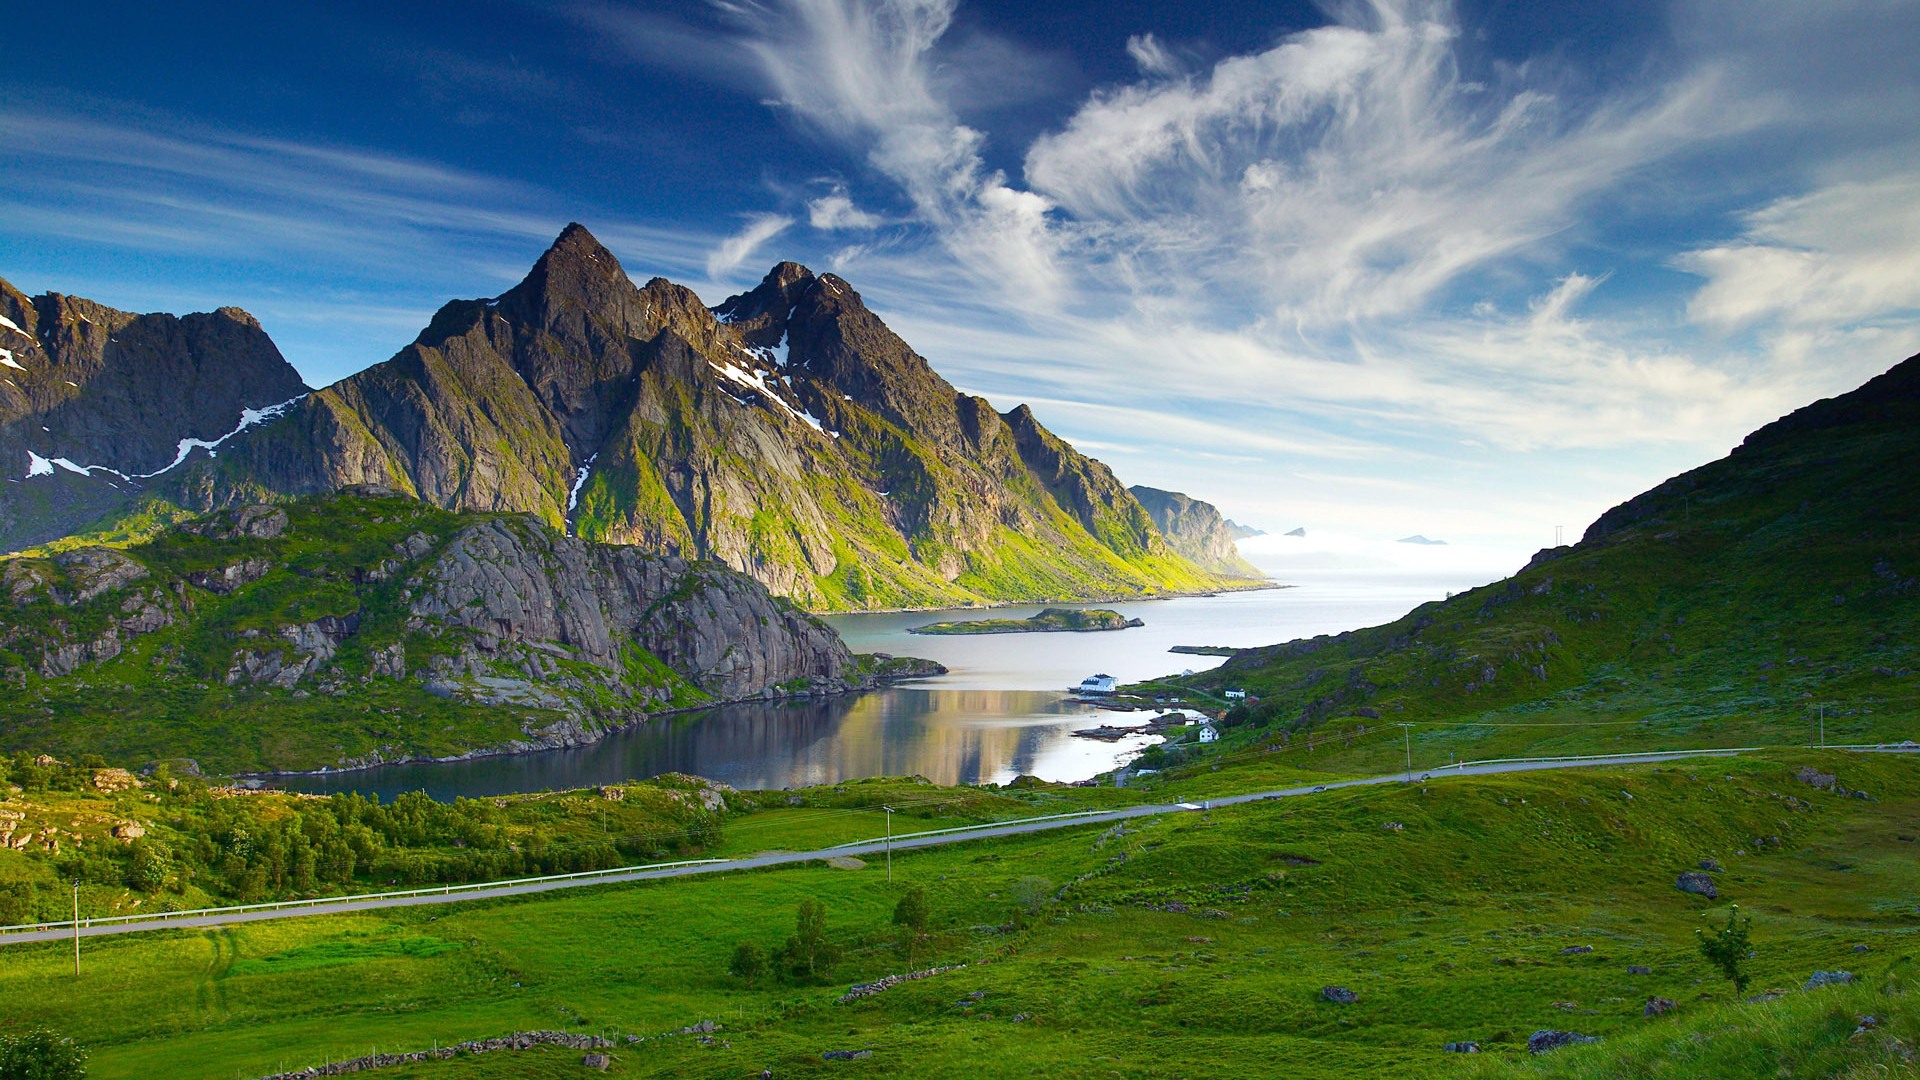 Windows 7 Wallpapers: Nordic Landscapes #1 - 1920x1080